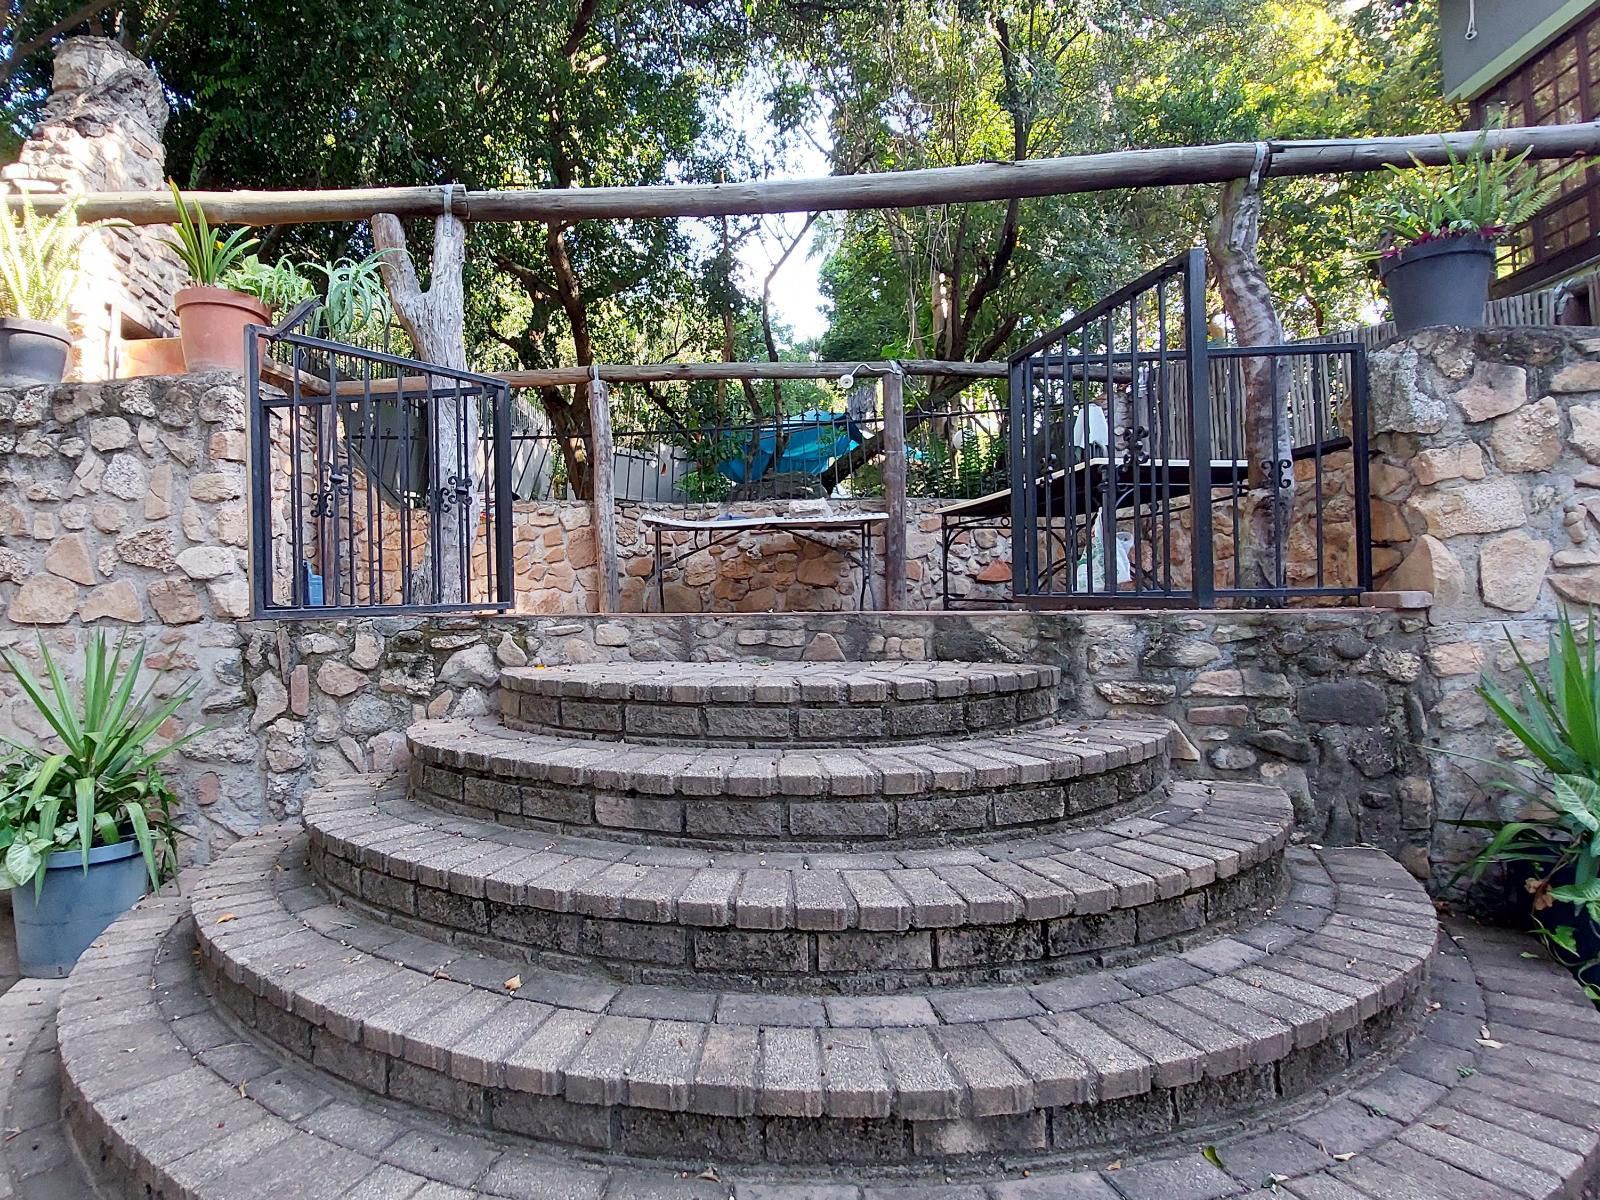 Mbombela Exclusive Guest House Sonheuwel Nelspruit Mpumalanga South Africa Stairs, Architecture, Garden, Nature, Plant